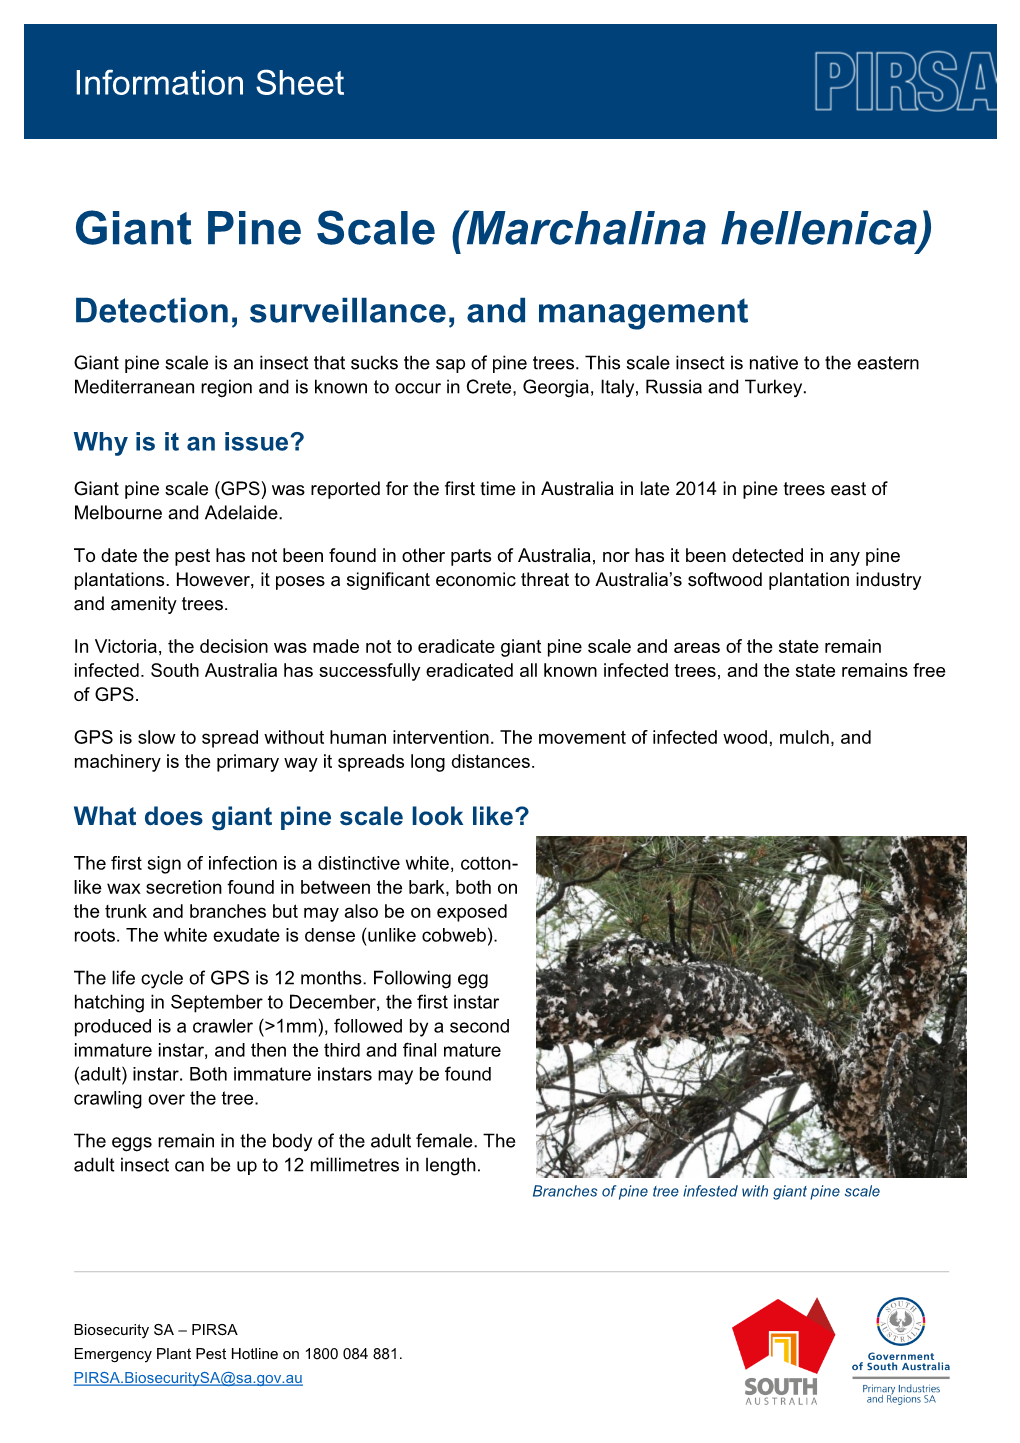 Giant Pine Scale (Marchalina Hellenica)